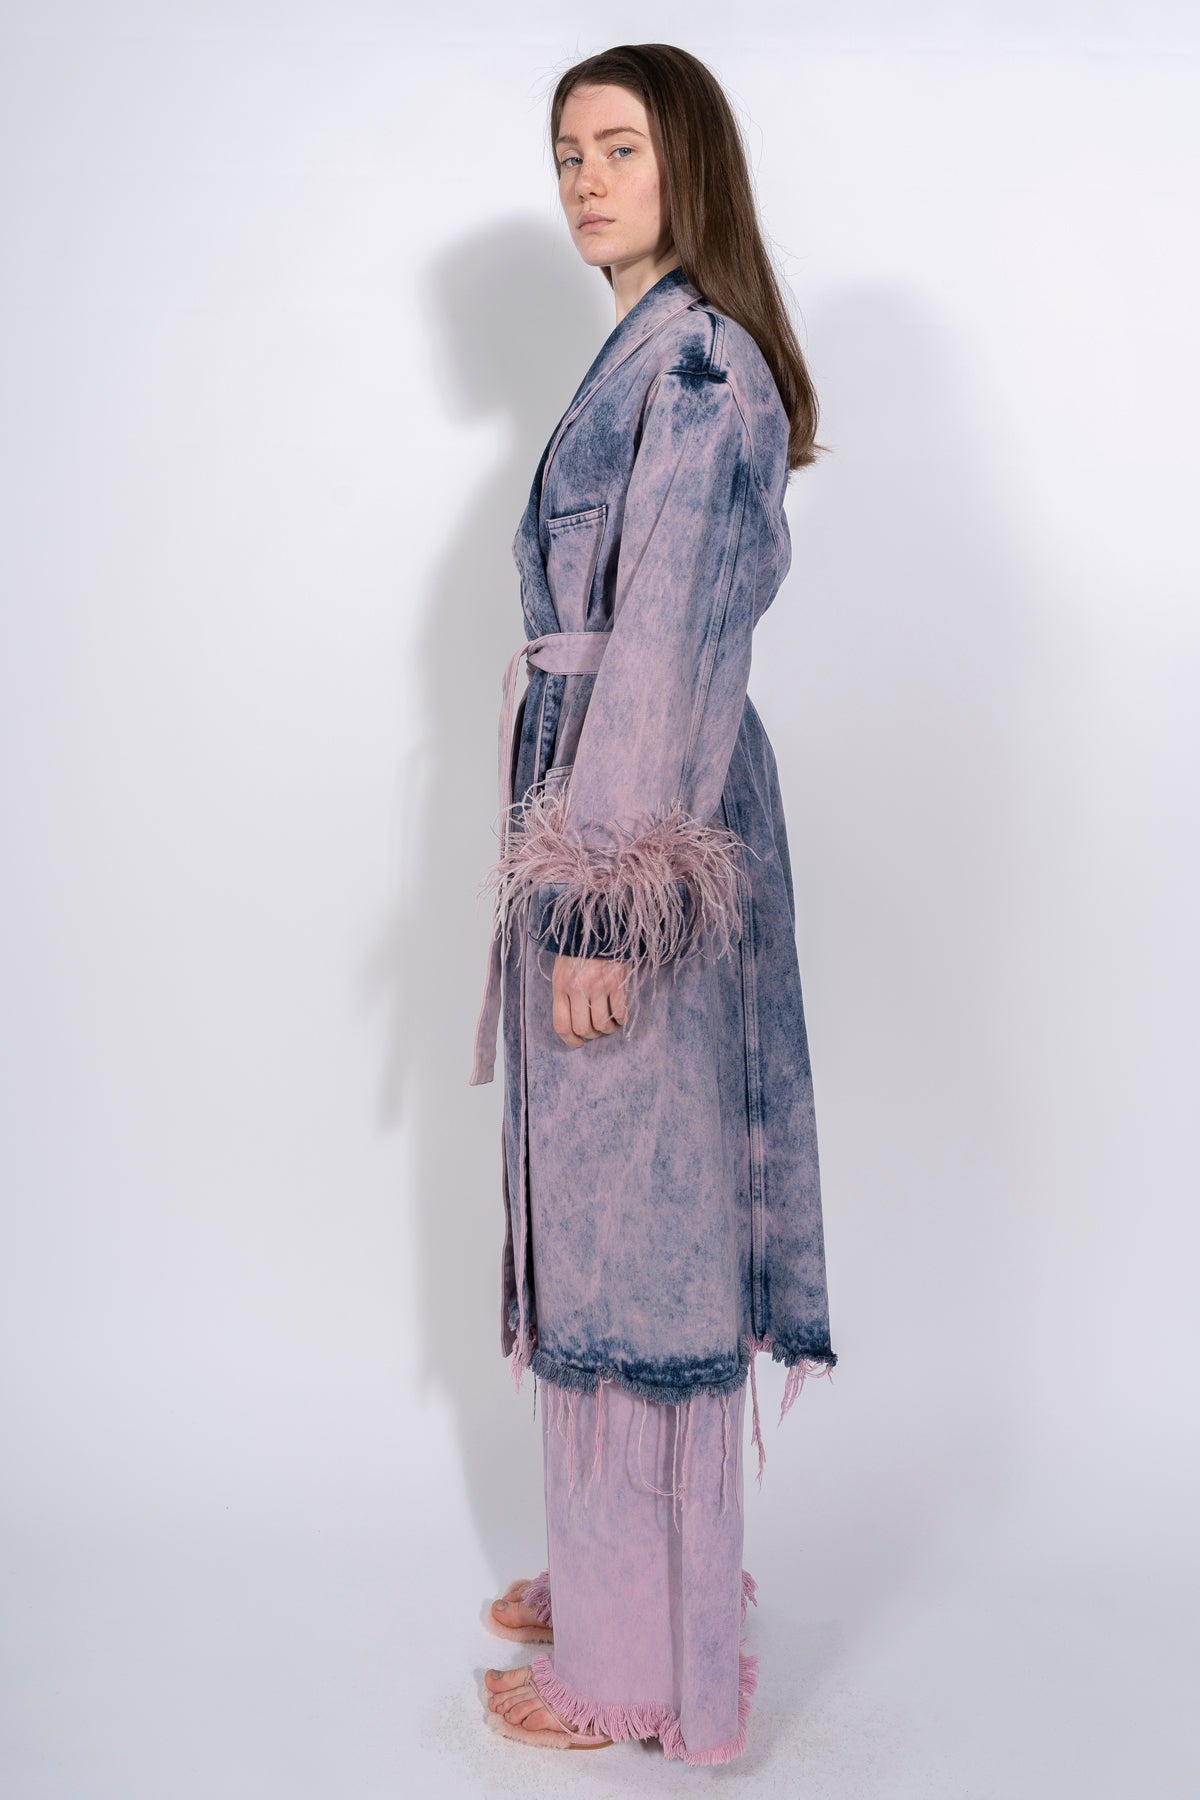 DRESSING GOWN STYLE COAT WITH FEATHERS INSERT marques almeida